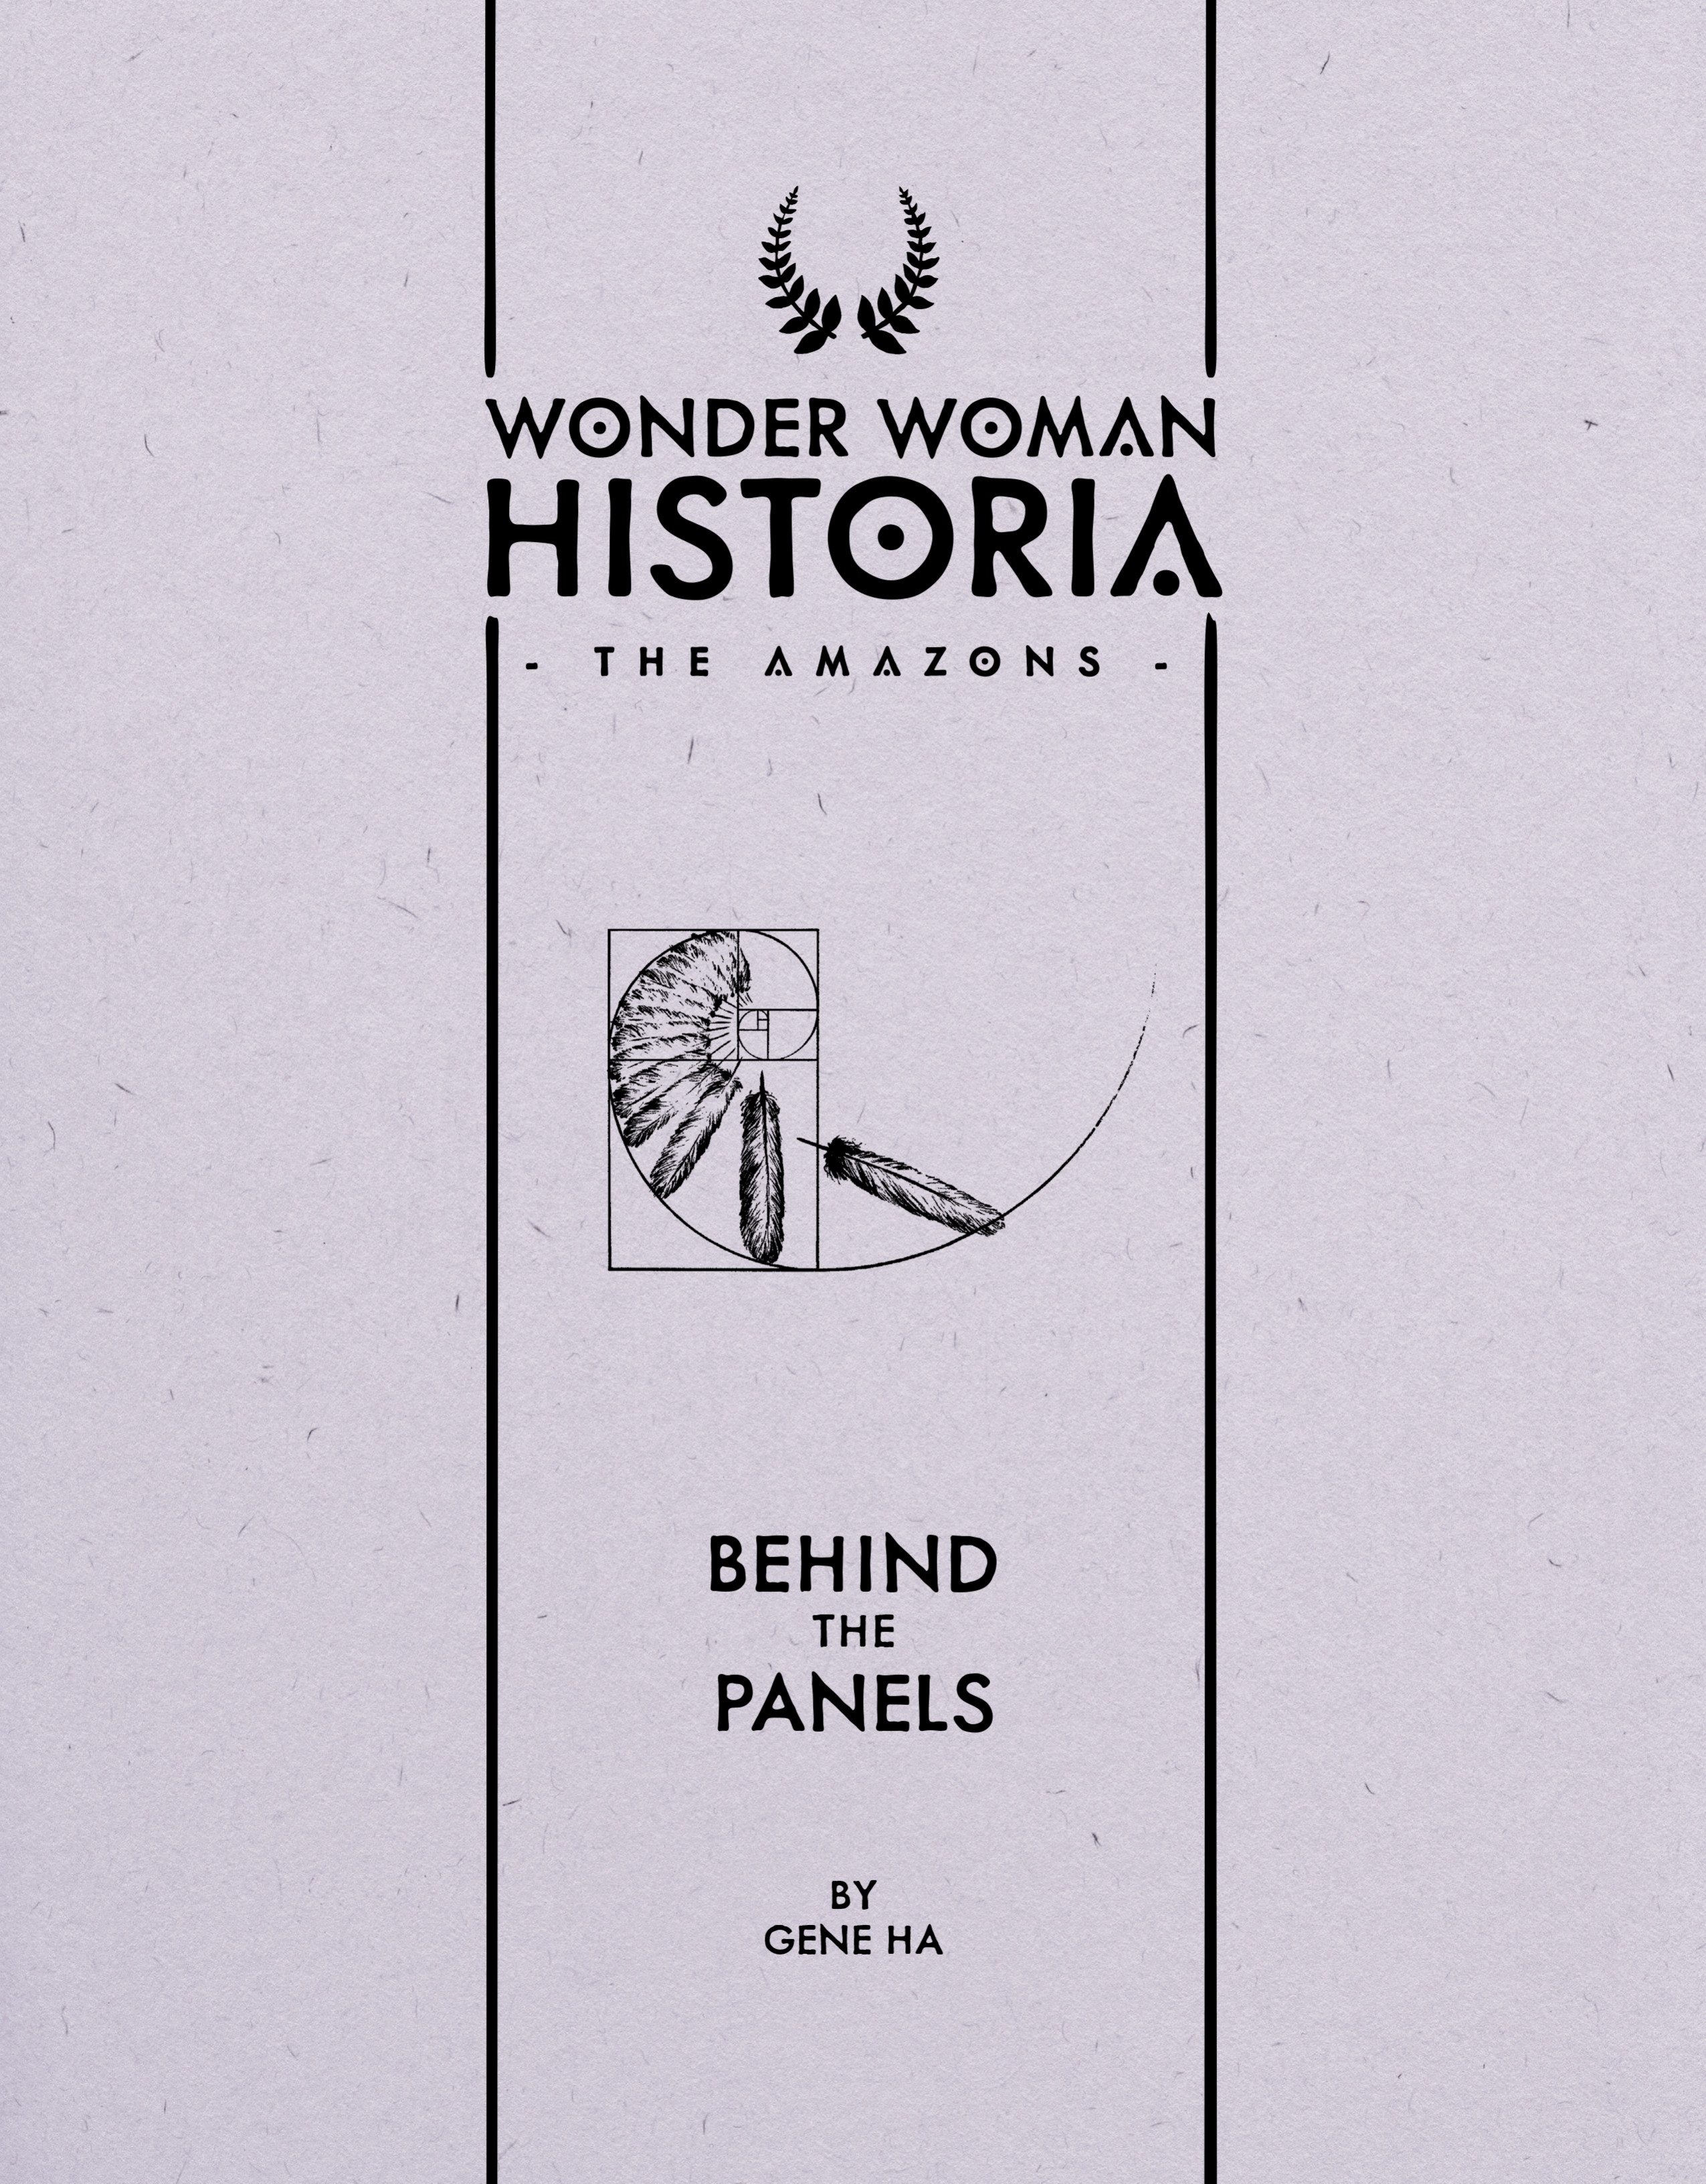 Read online Wonder Woman Historia: The Amazons comic -  Issue #2 - 53